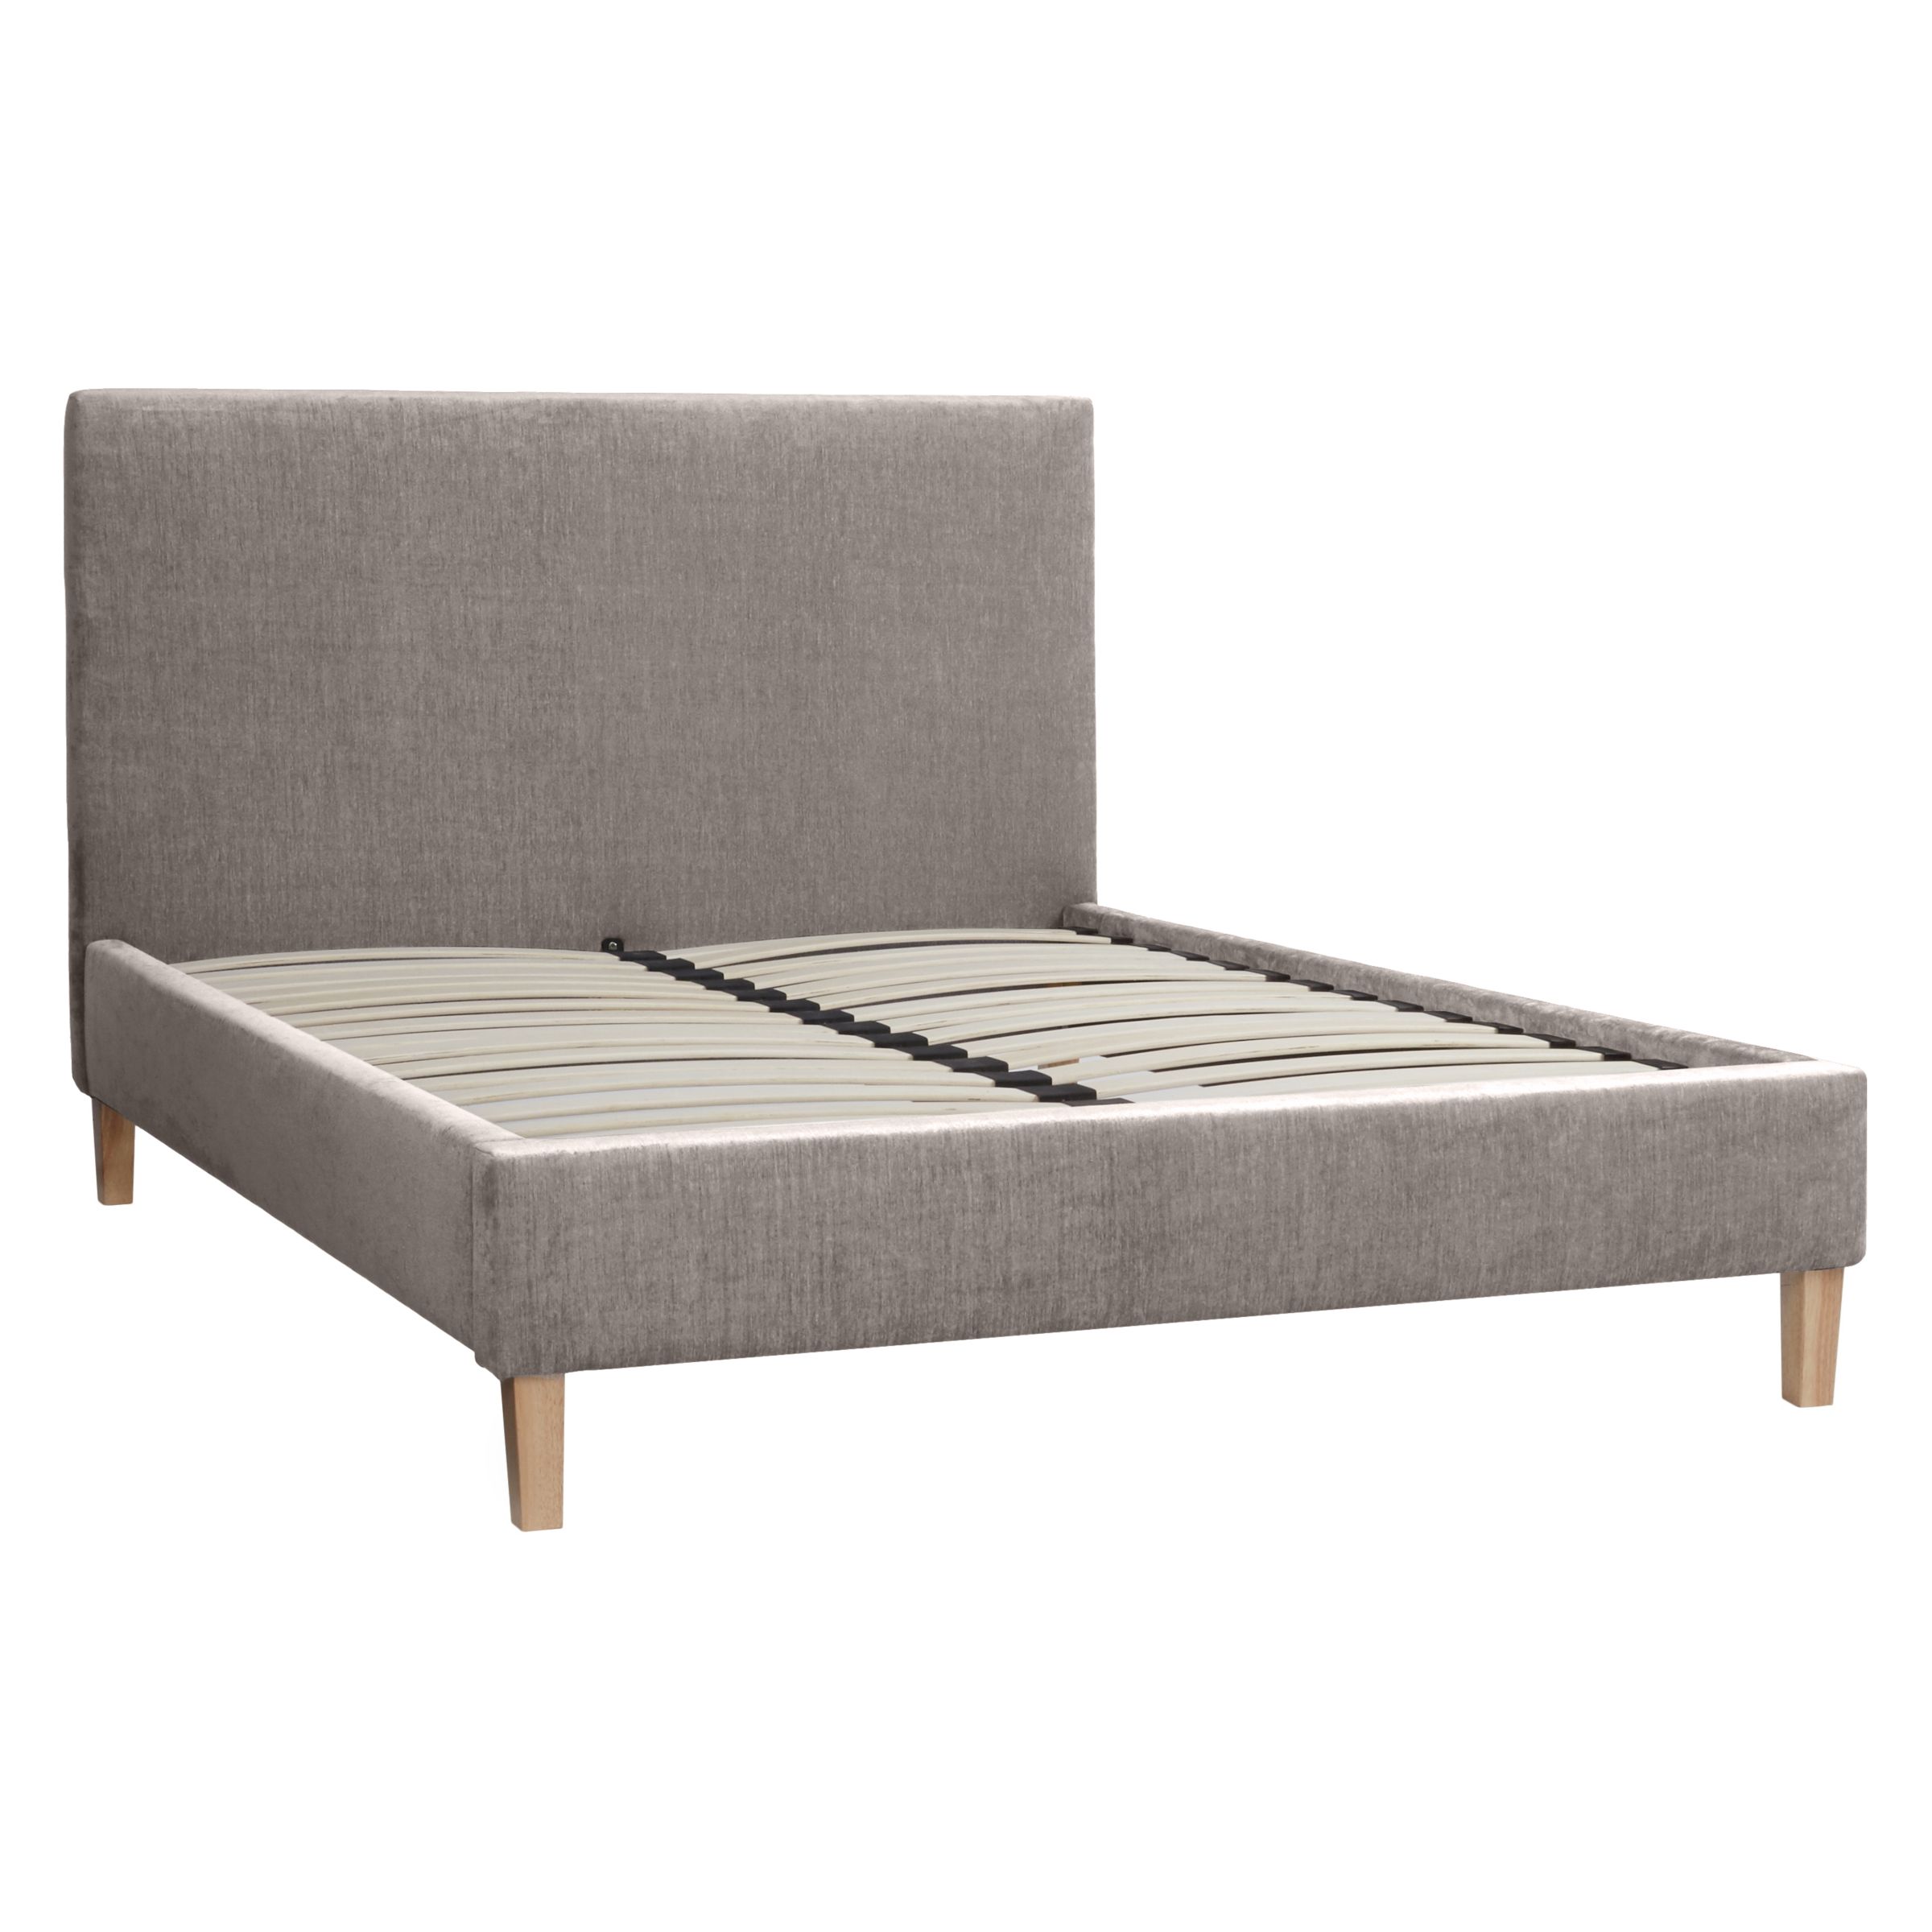 John Lewis & Partners Emily Bed Frame, Double